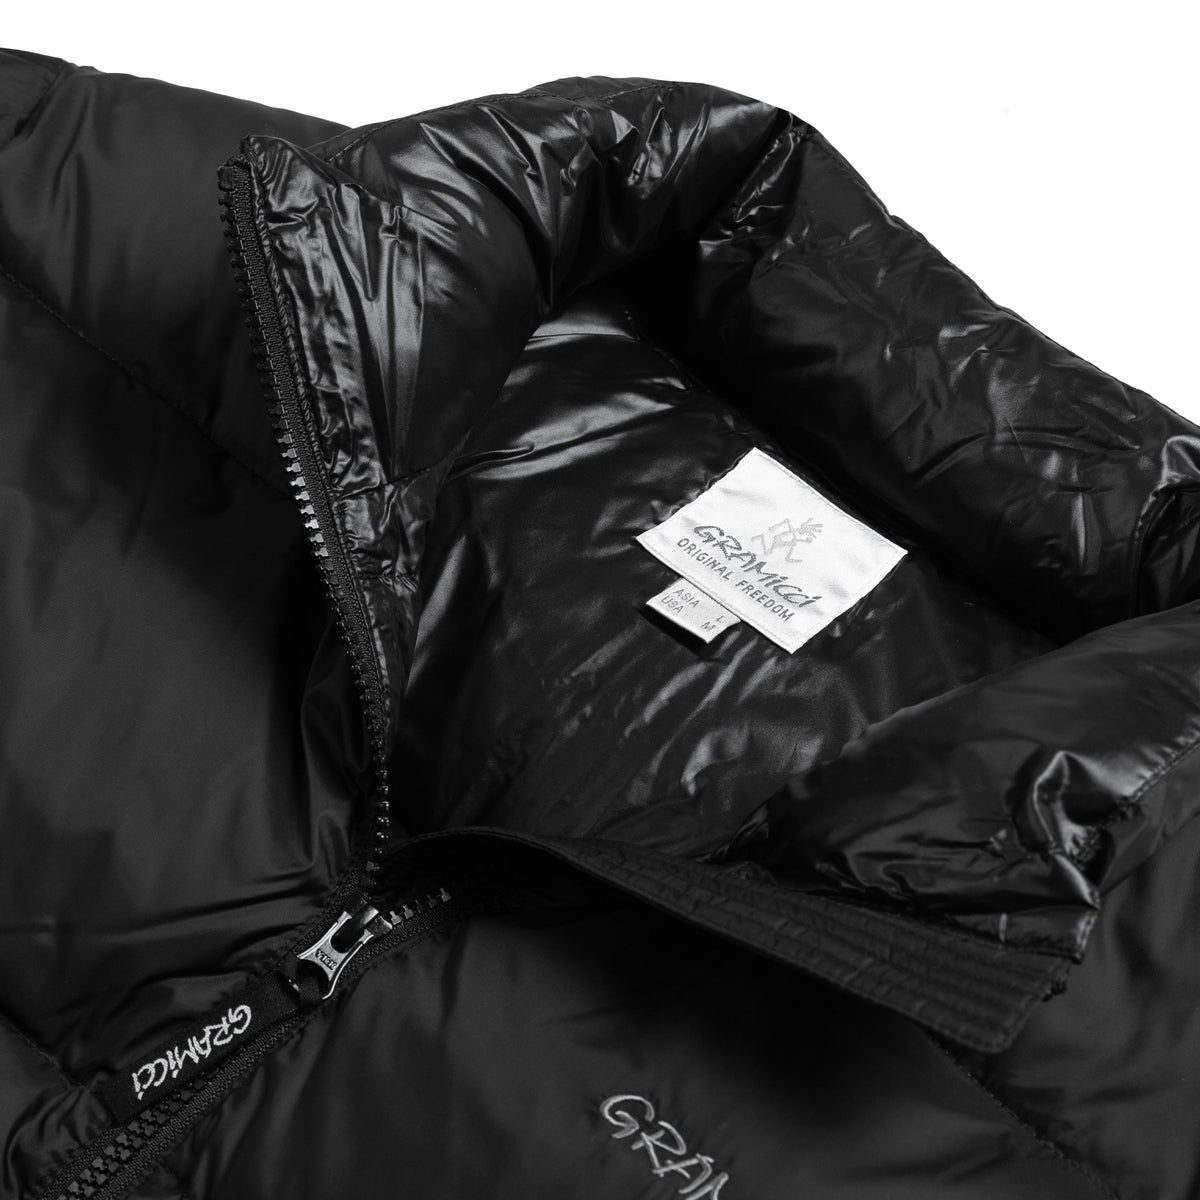 Gramicci Down Puffer Jacket – buy now at Asphaltgold Online Store!